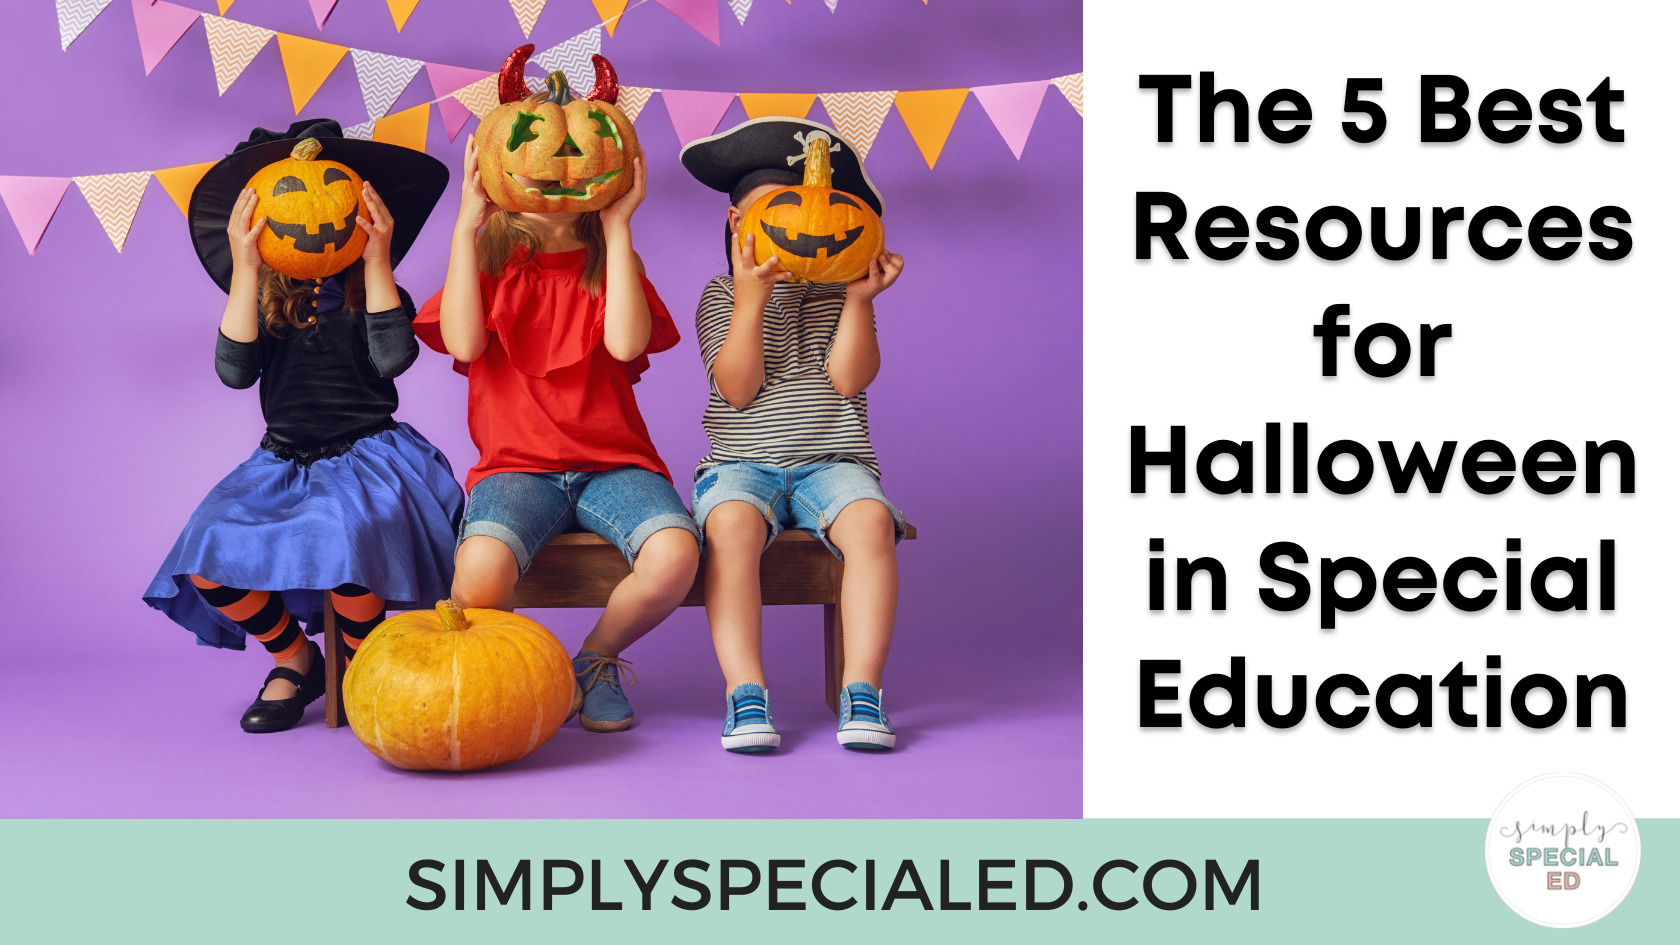 Halloween themed resources keep students engaged. Read on to learn about my favorite adapted Halloween Activities for special education.